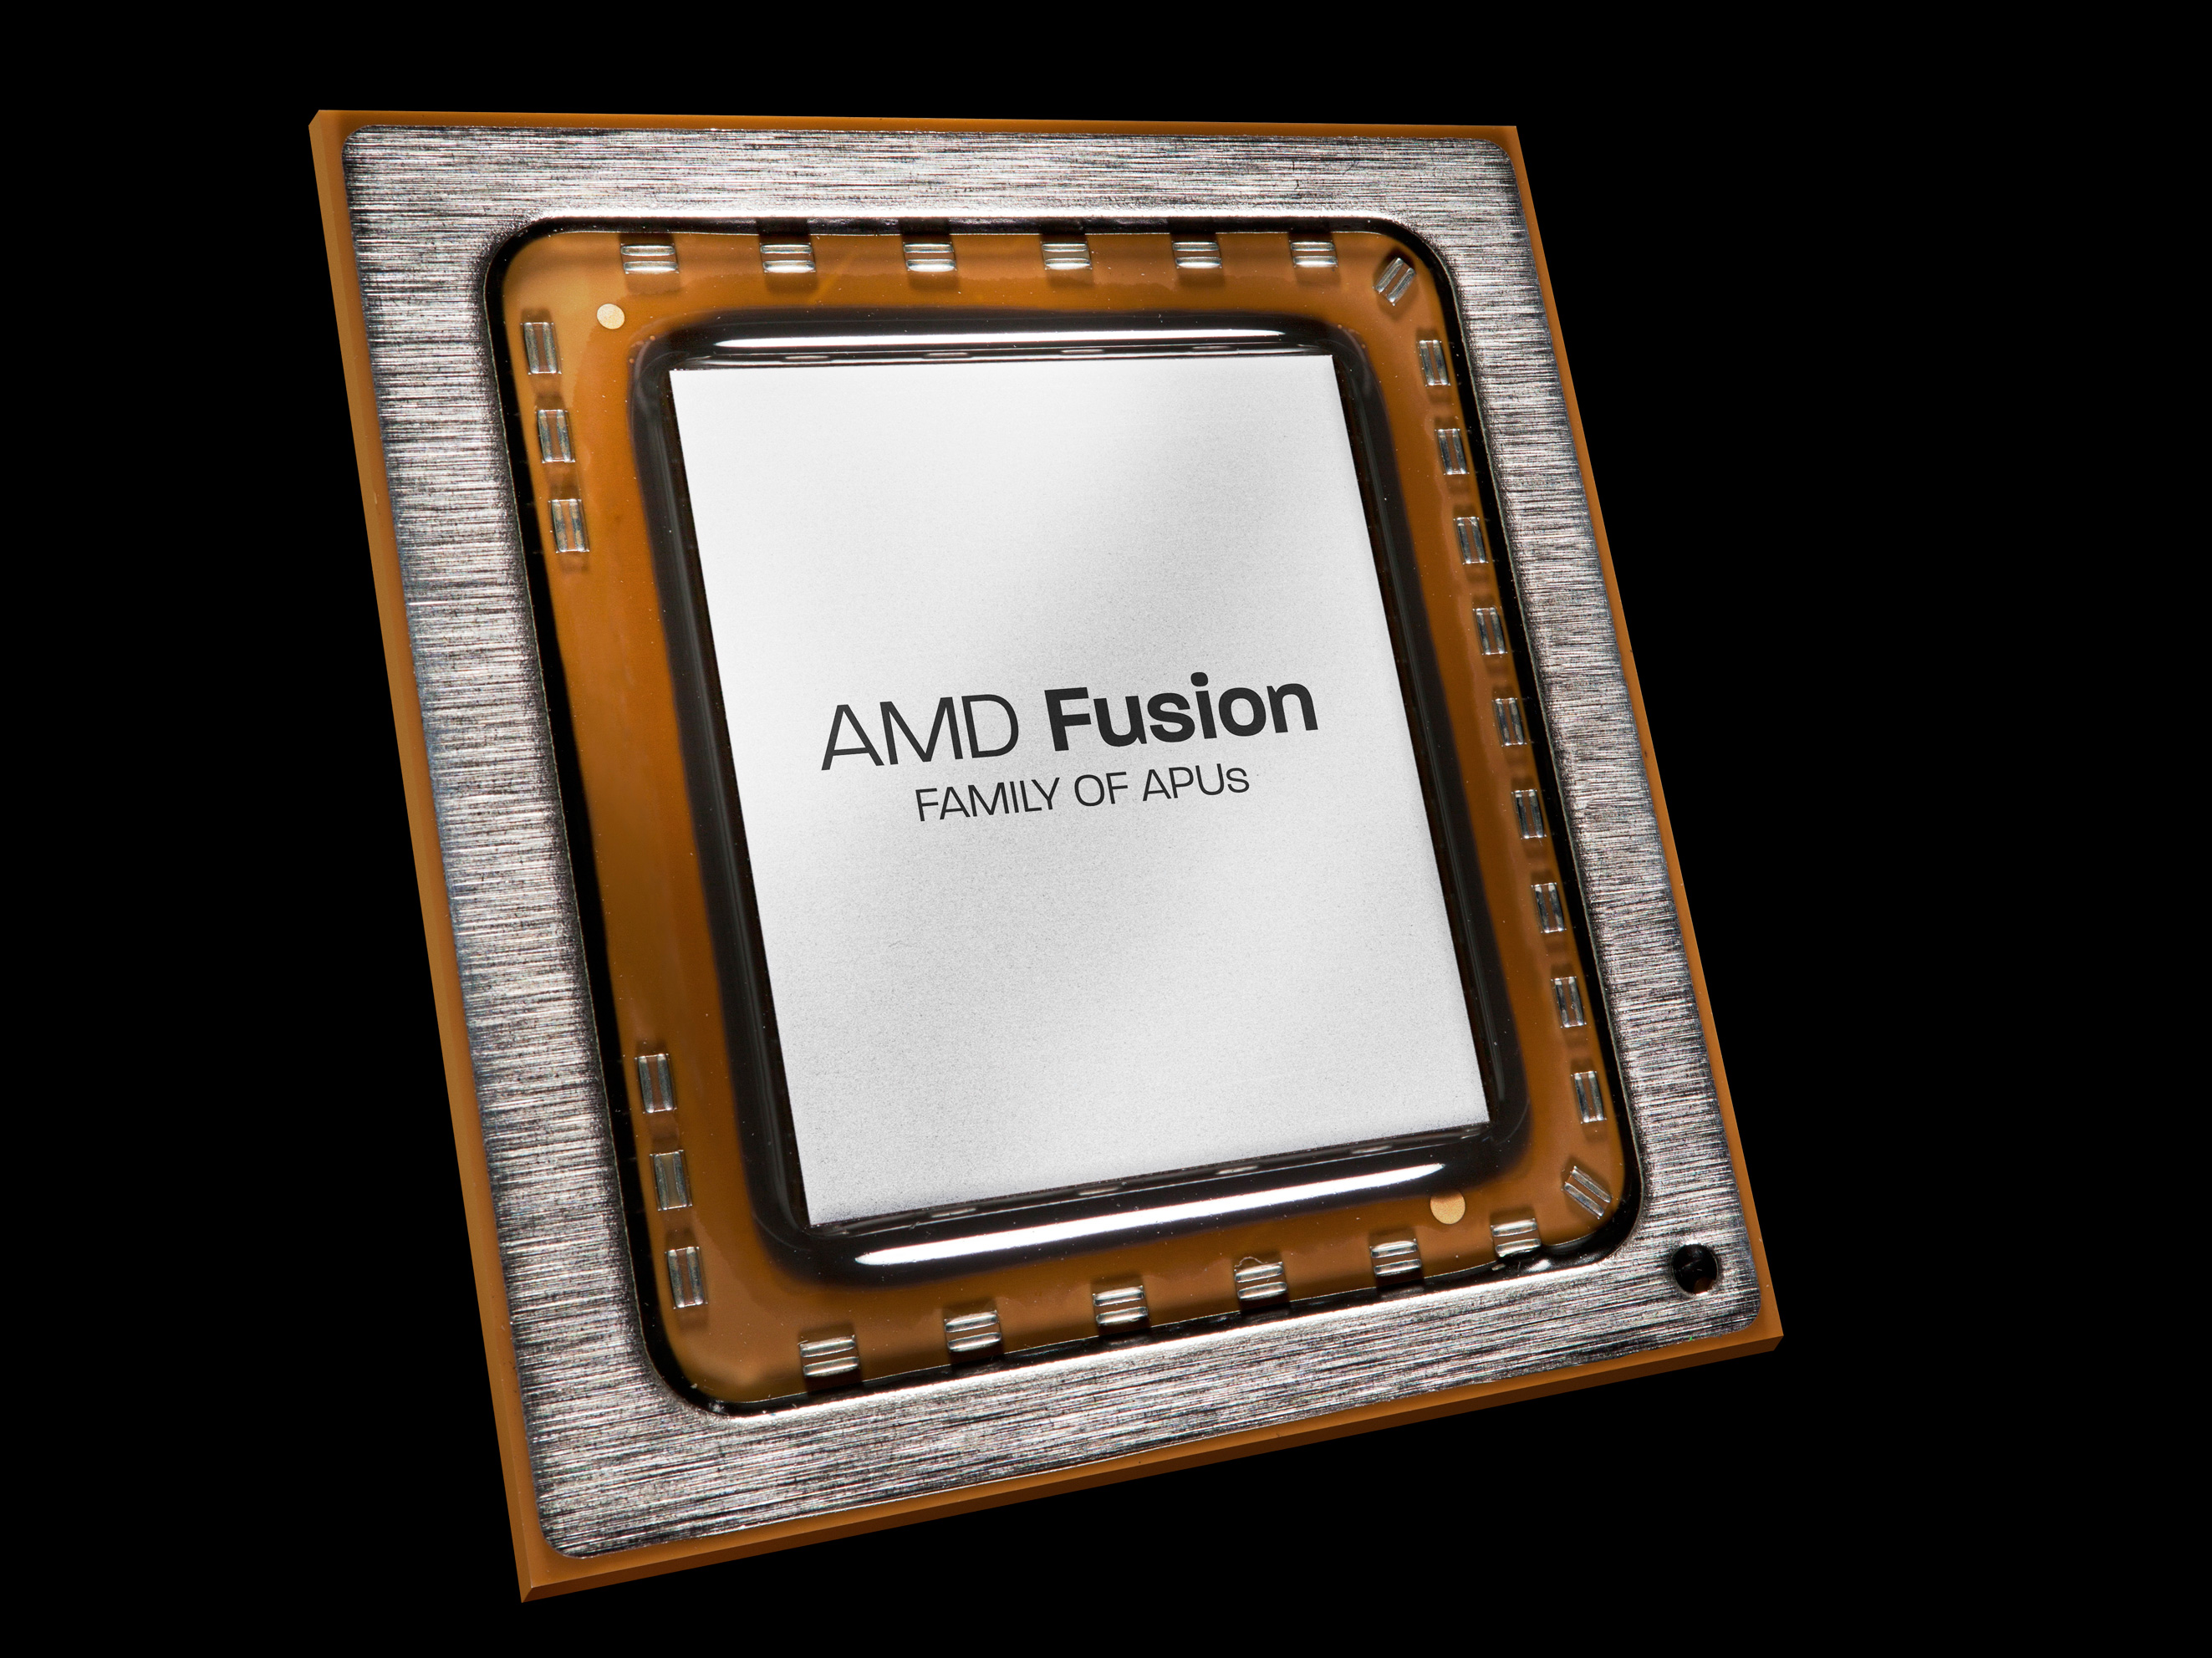 Power Consumption Final Words The Amd A8 3850 Review Llano On The Desktop